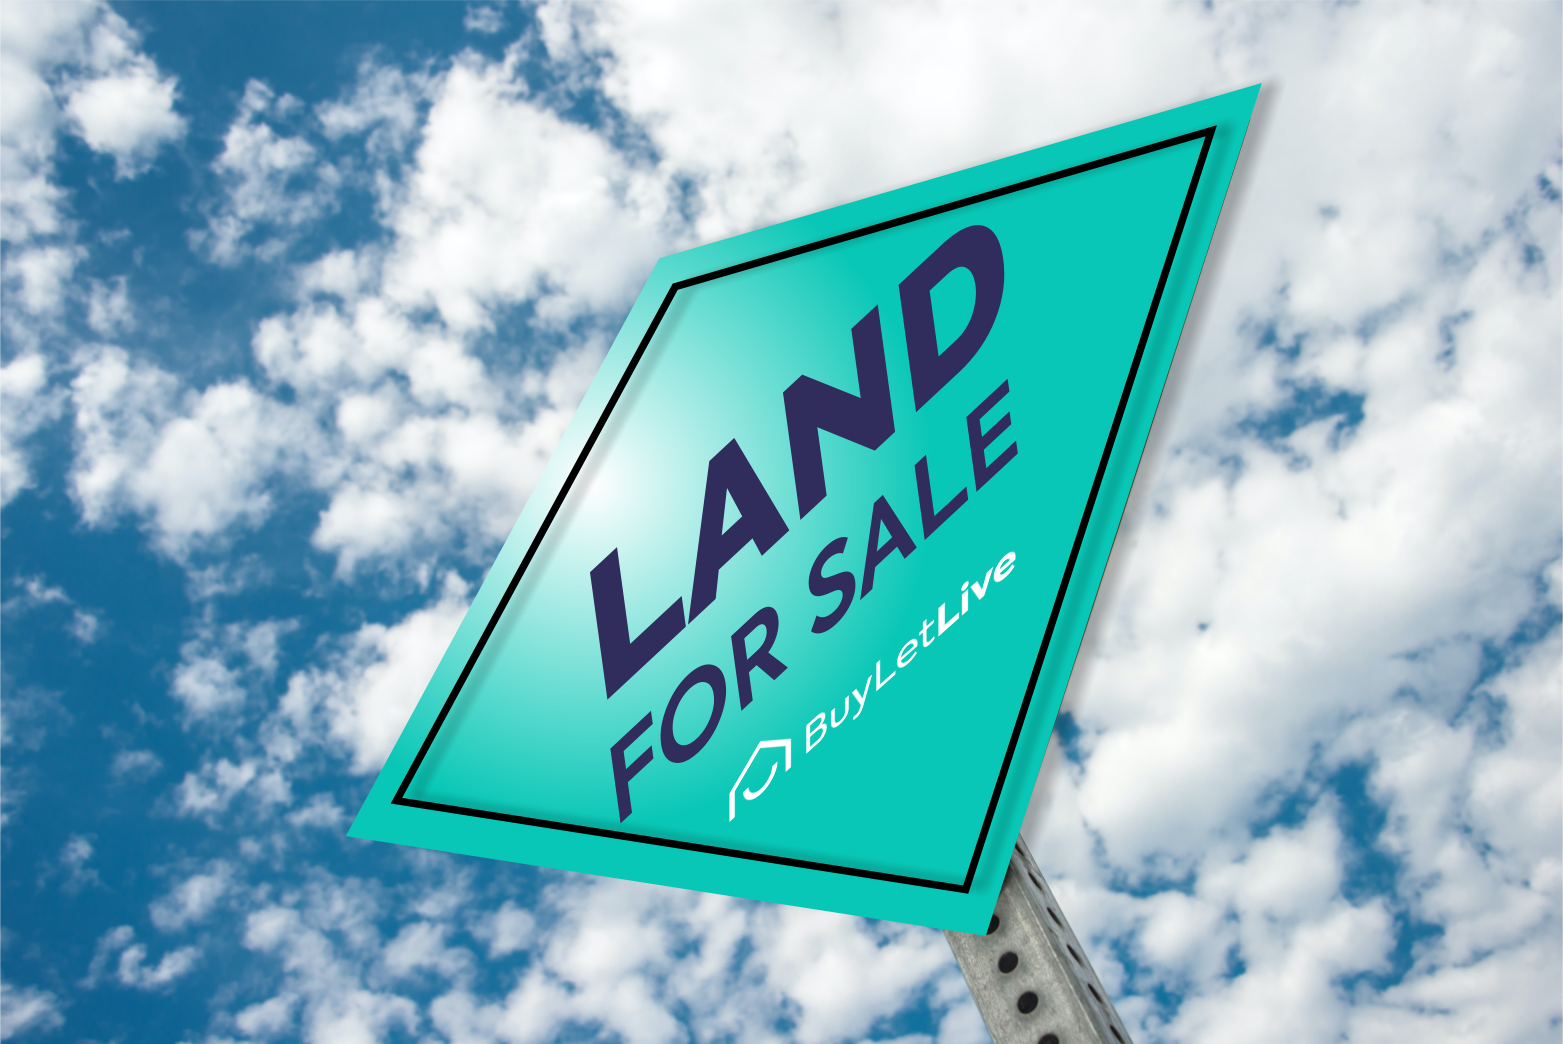 Land for sale at Ayobo